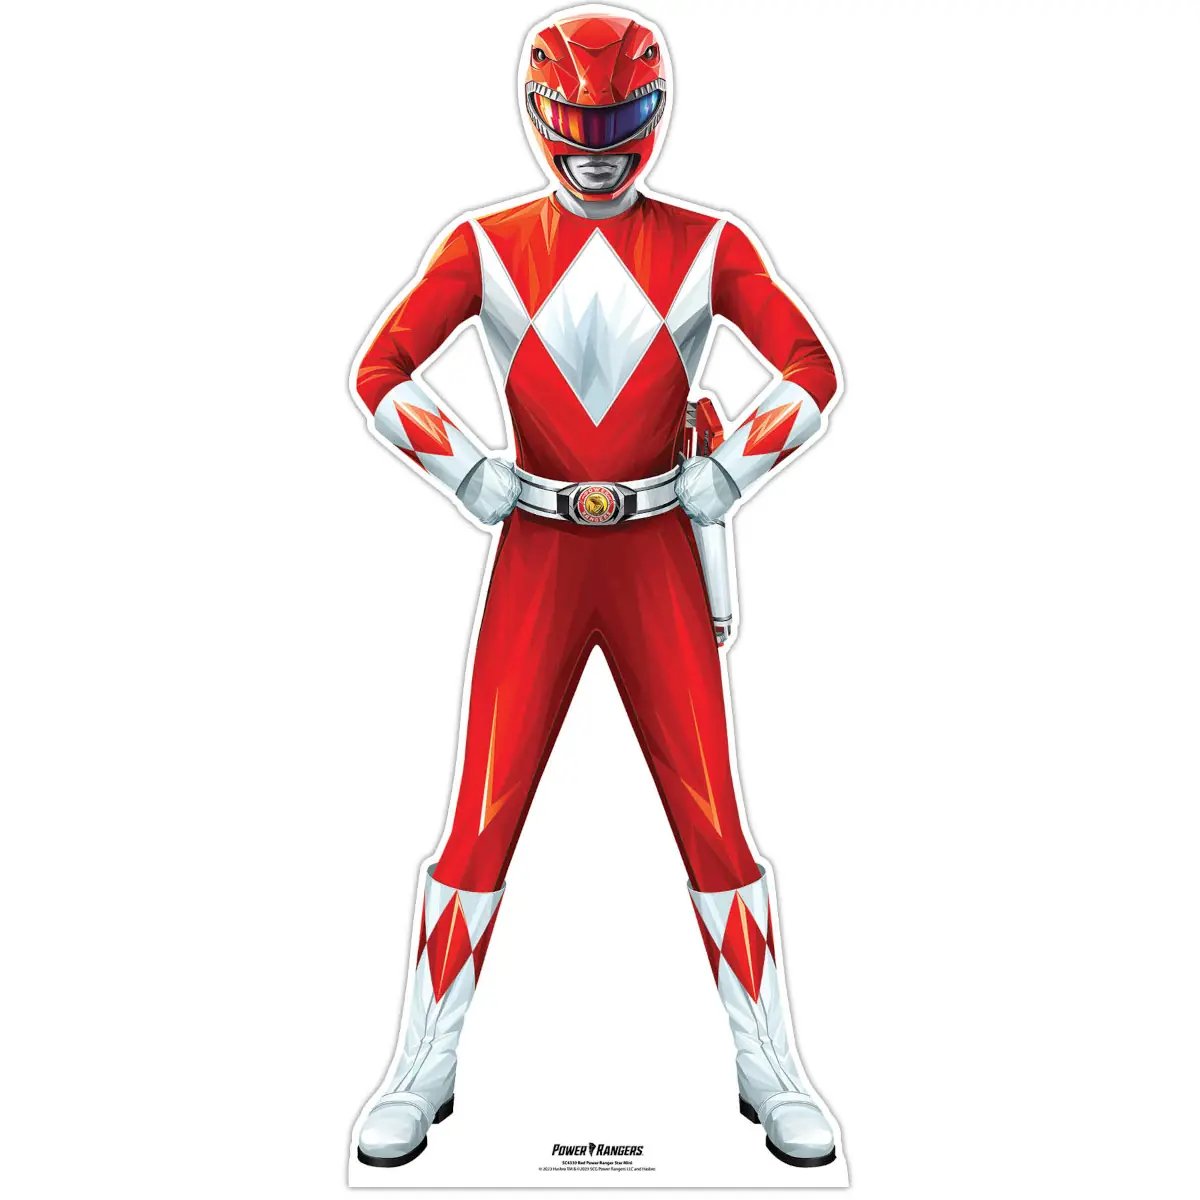 Red Power Ranger Official Mini Cardboard Cutout Standee Front